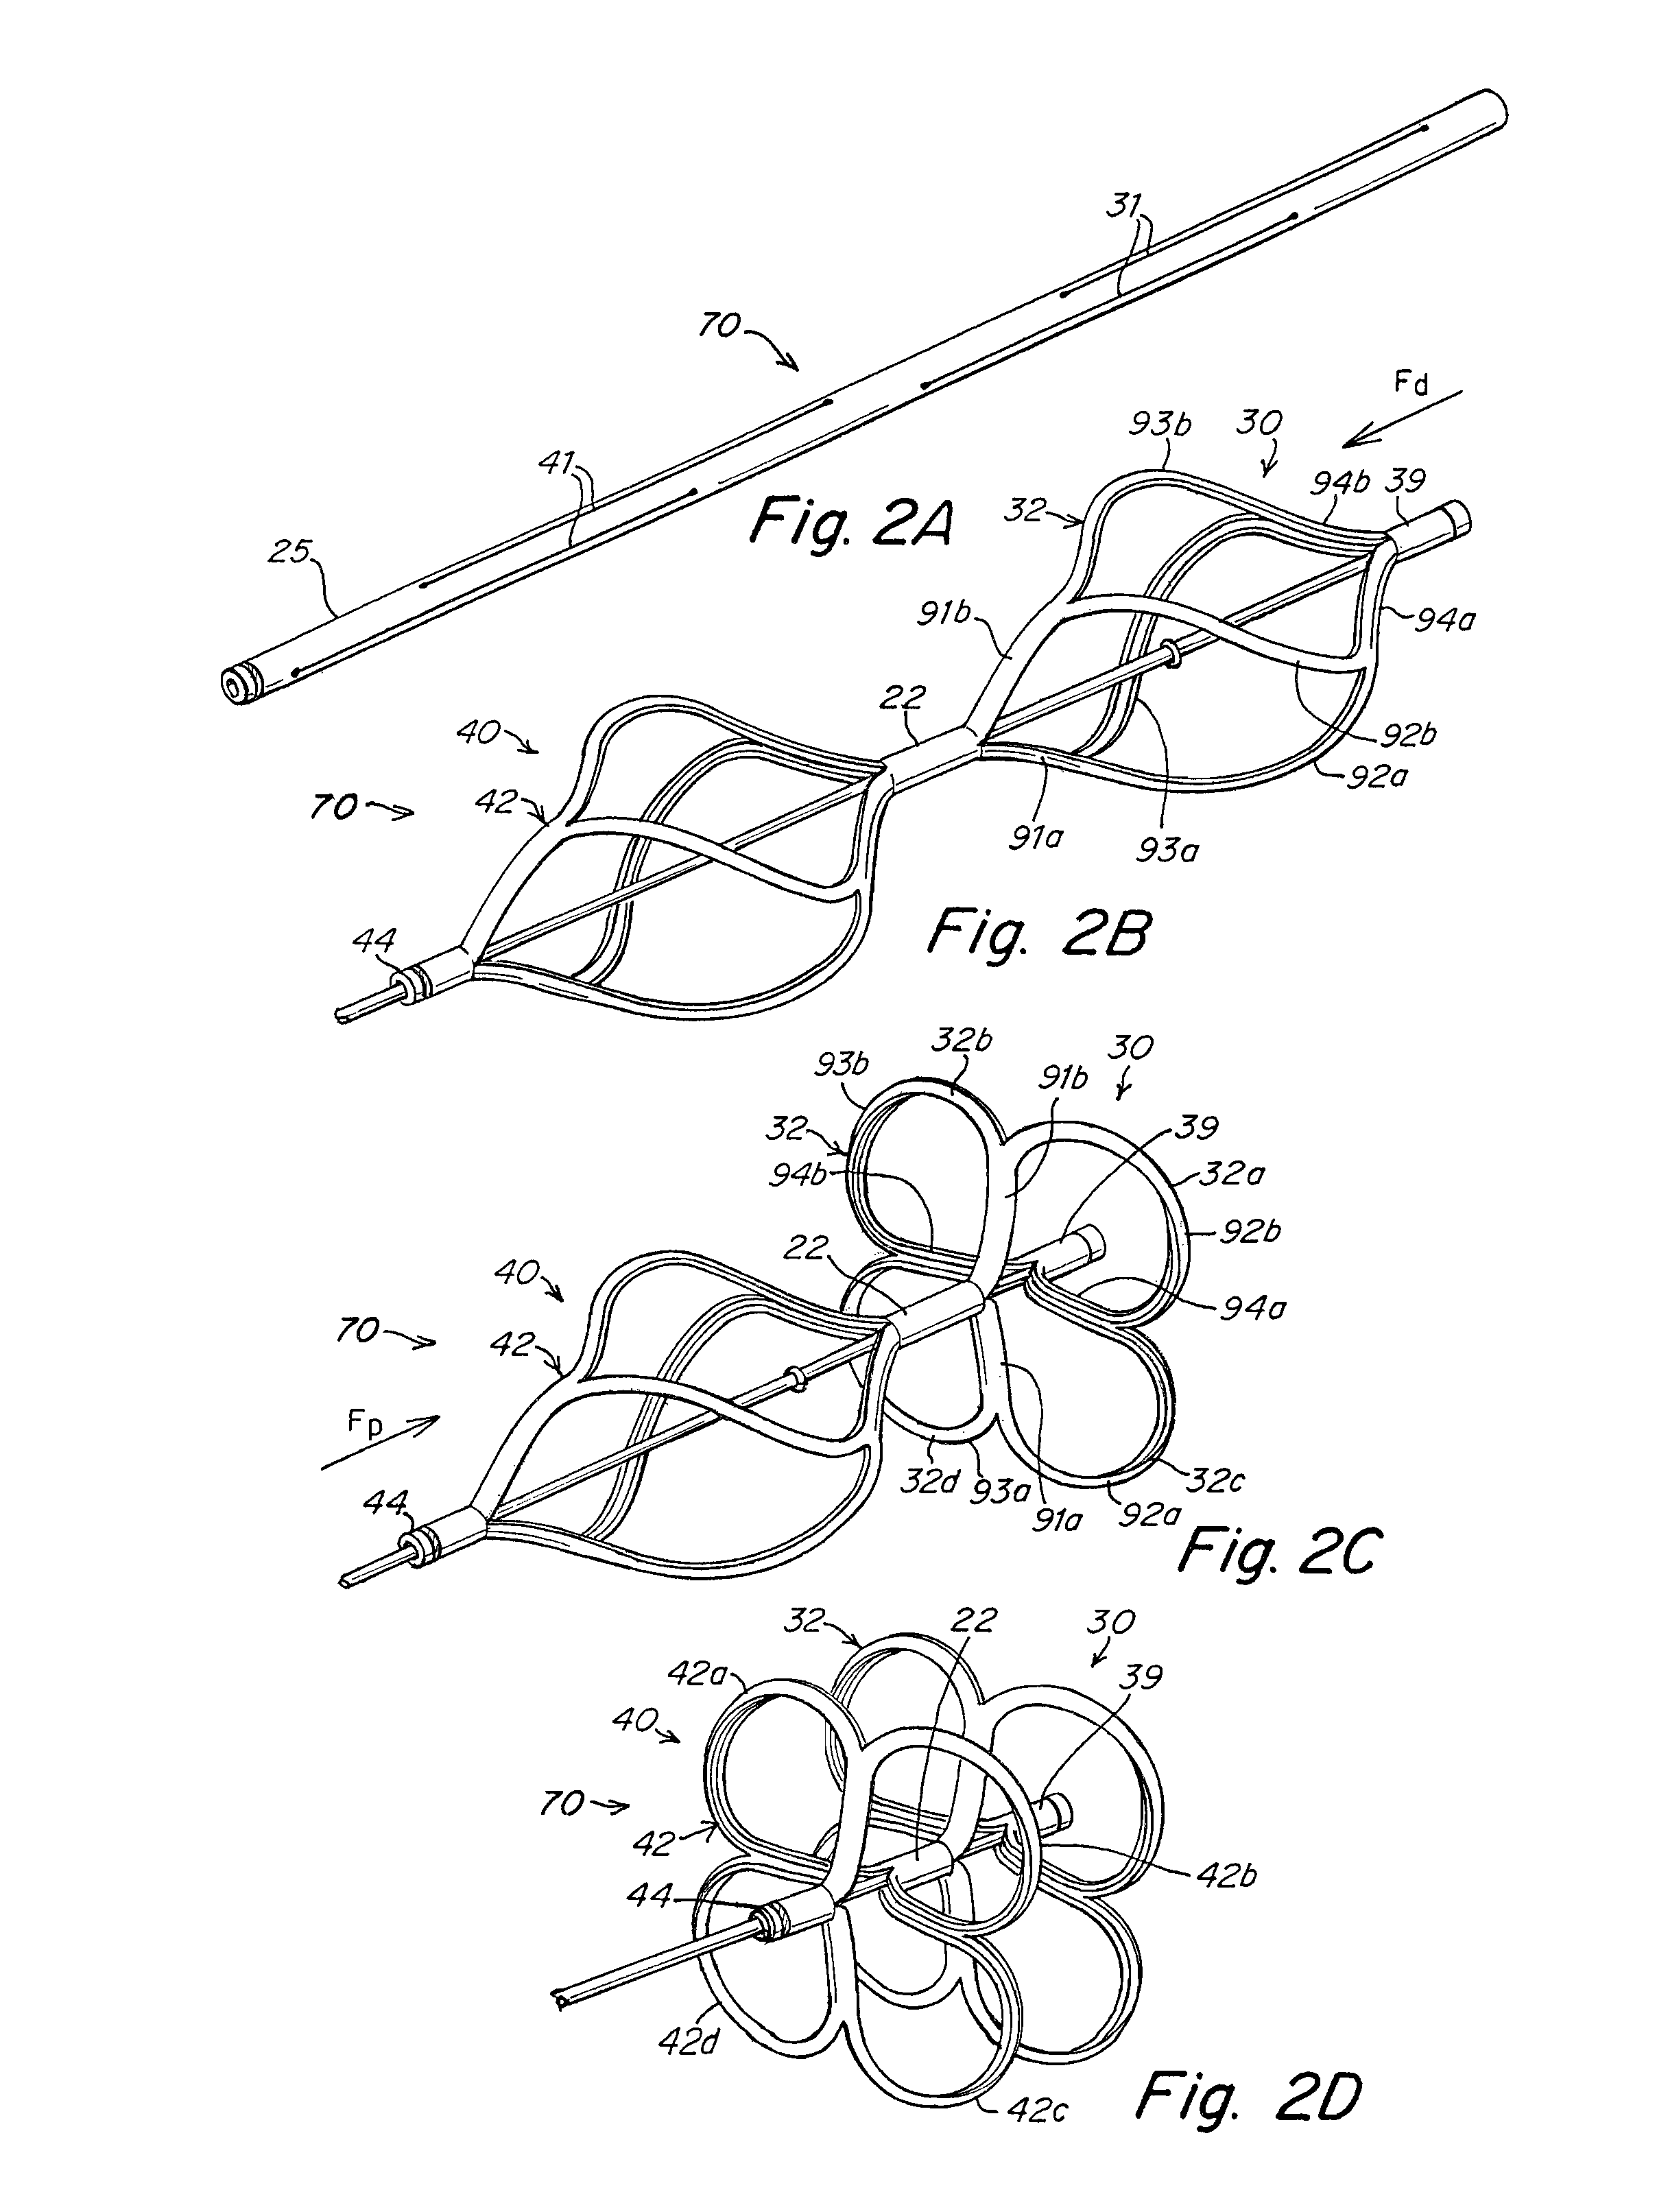 Implant-catheter attachment mechanism using snare and method of use